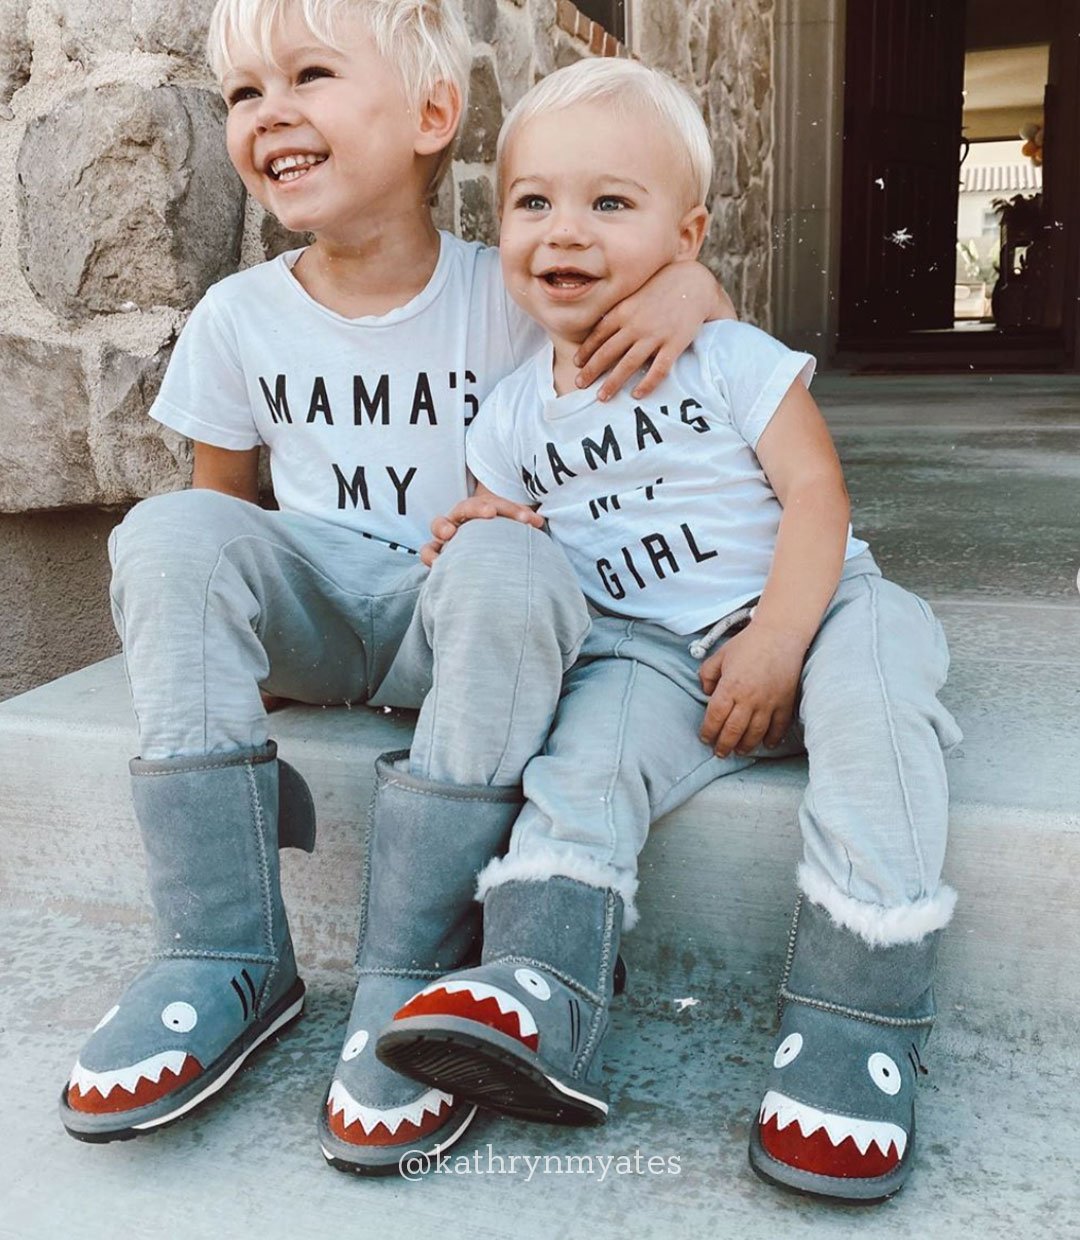 Young boy and girl sitting on step smiling and wearing EMU Little Creature Shark boots